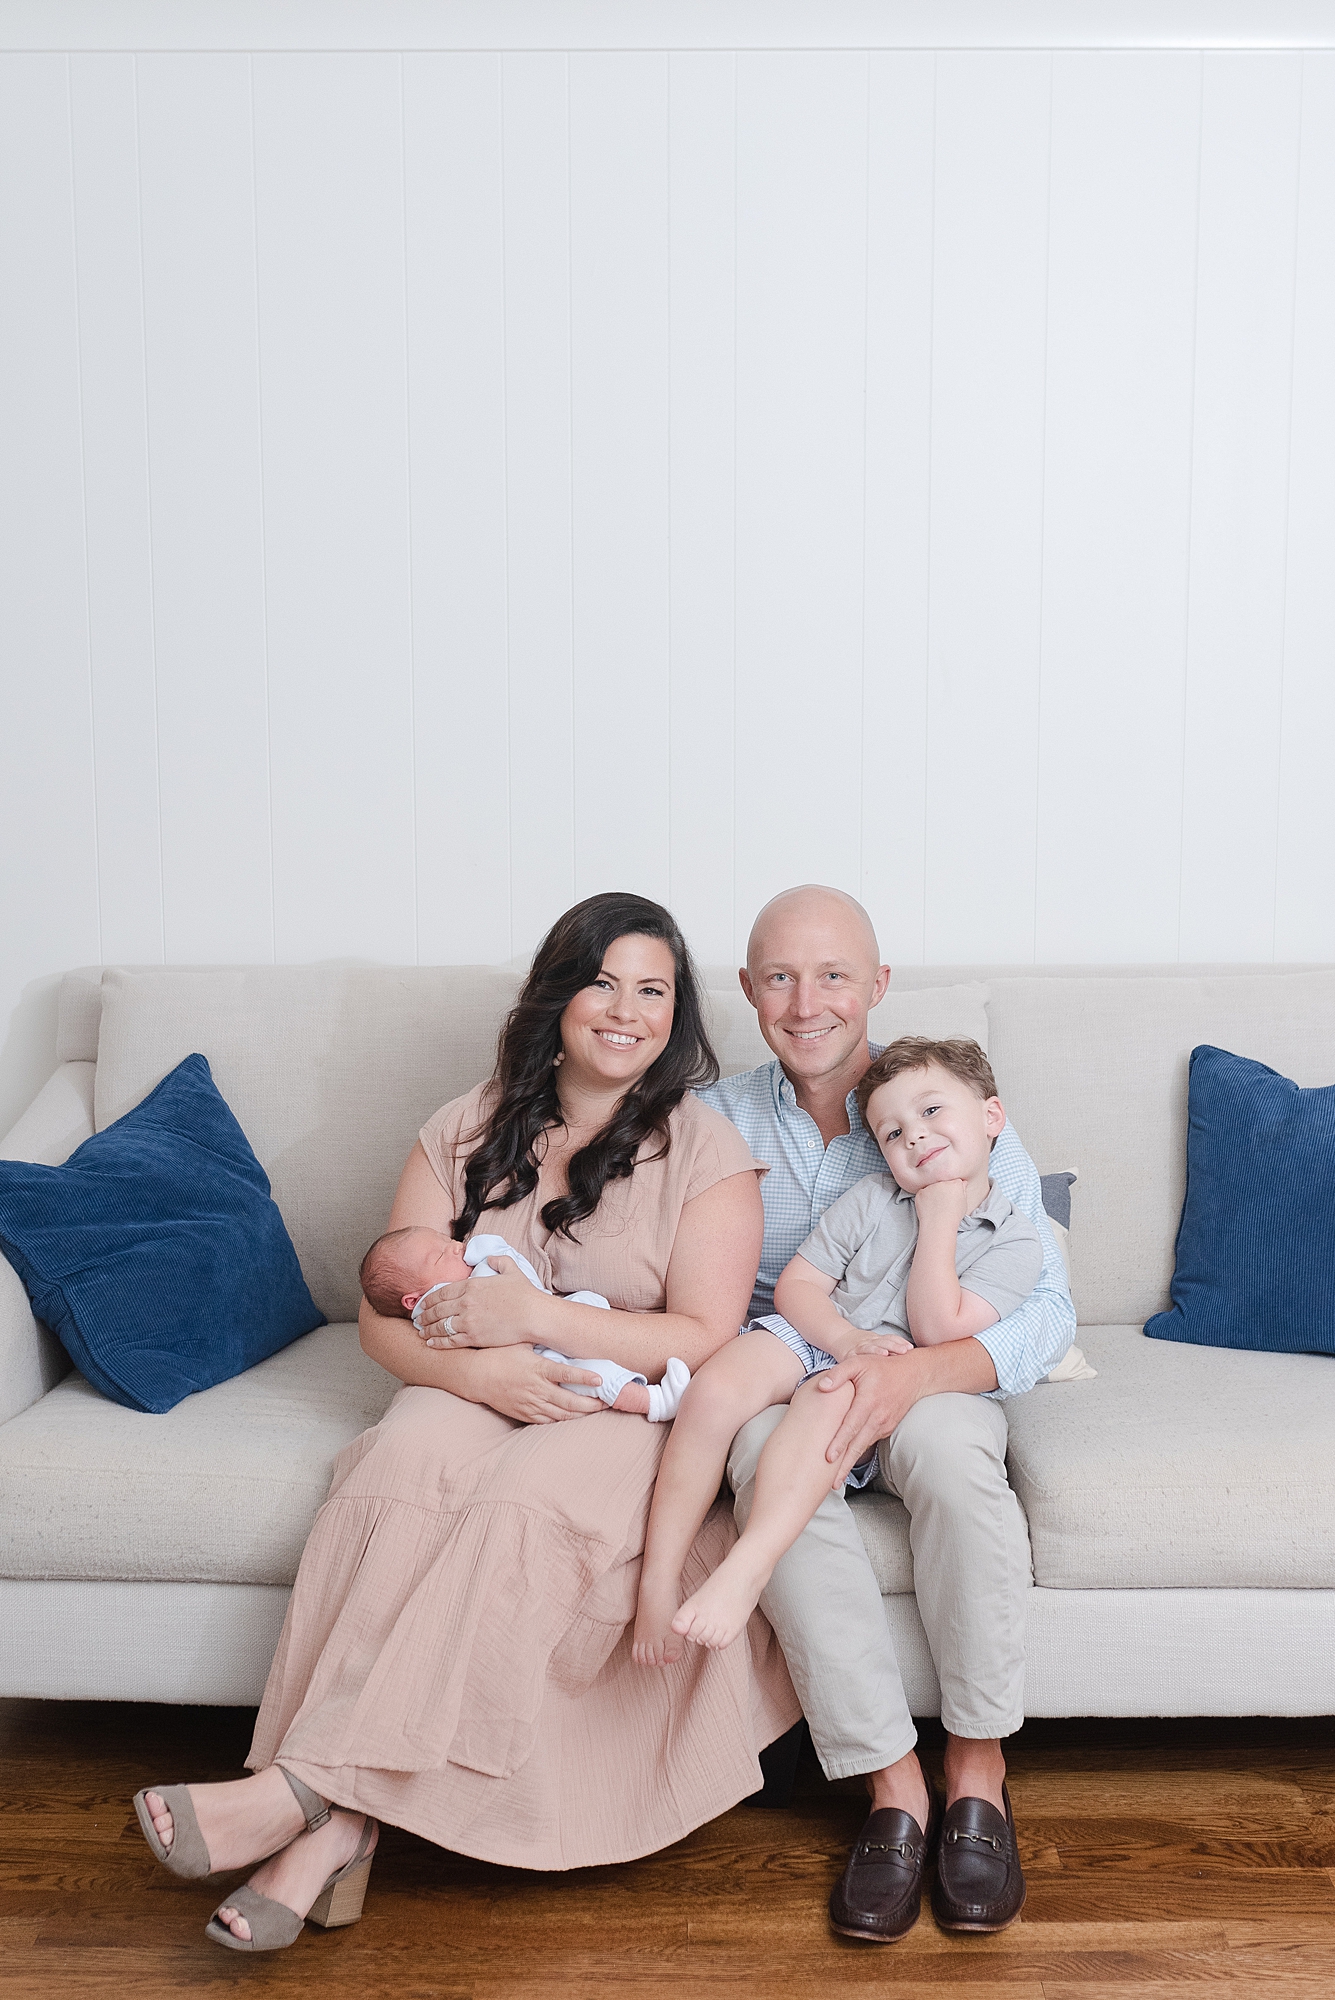 Nashville Family of Four celebrates their newborn son with some bright and radiant photos in their home